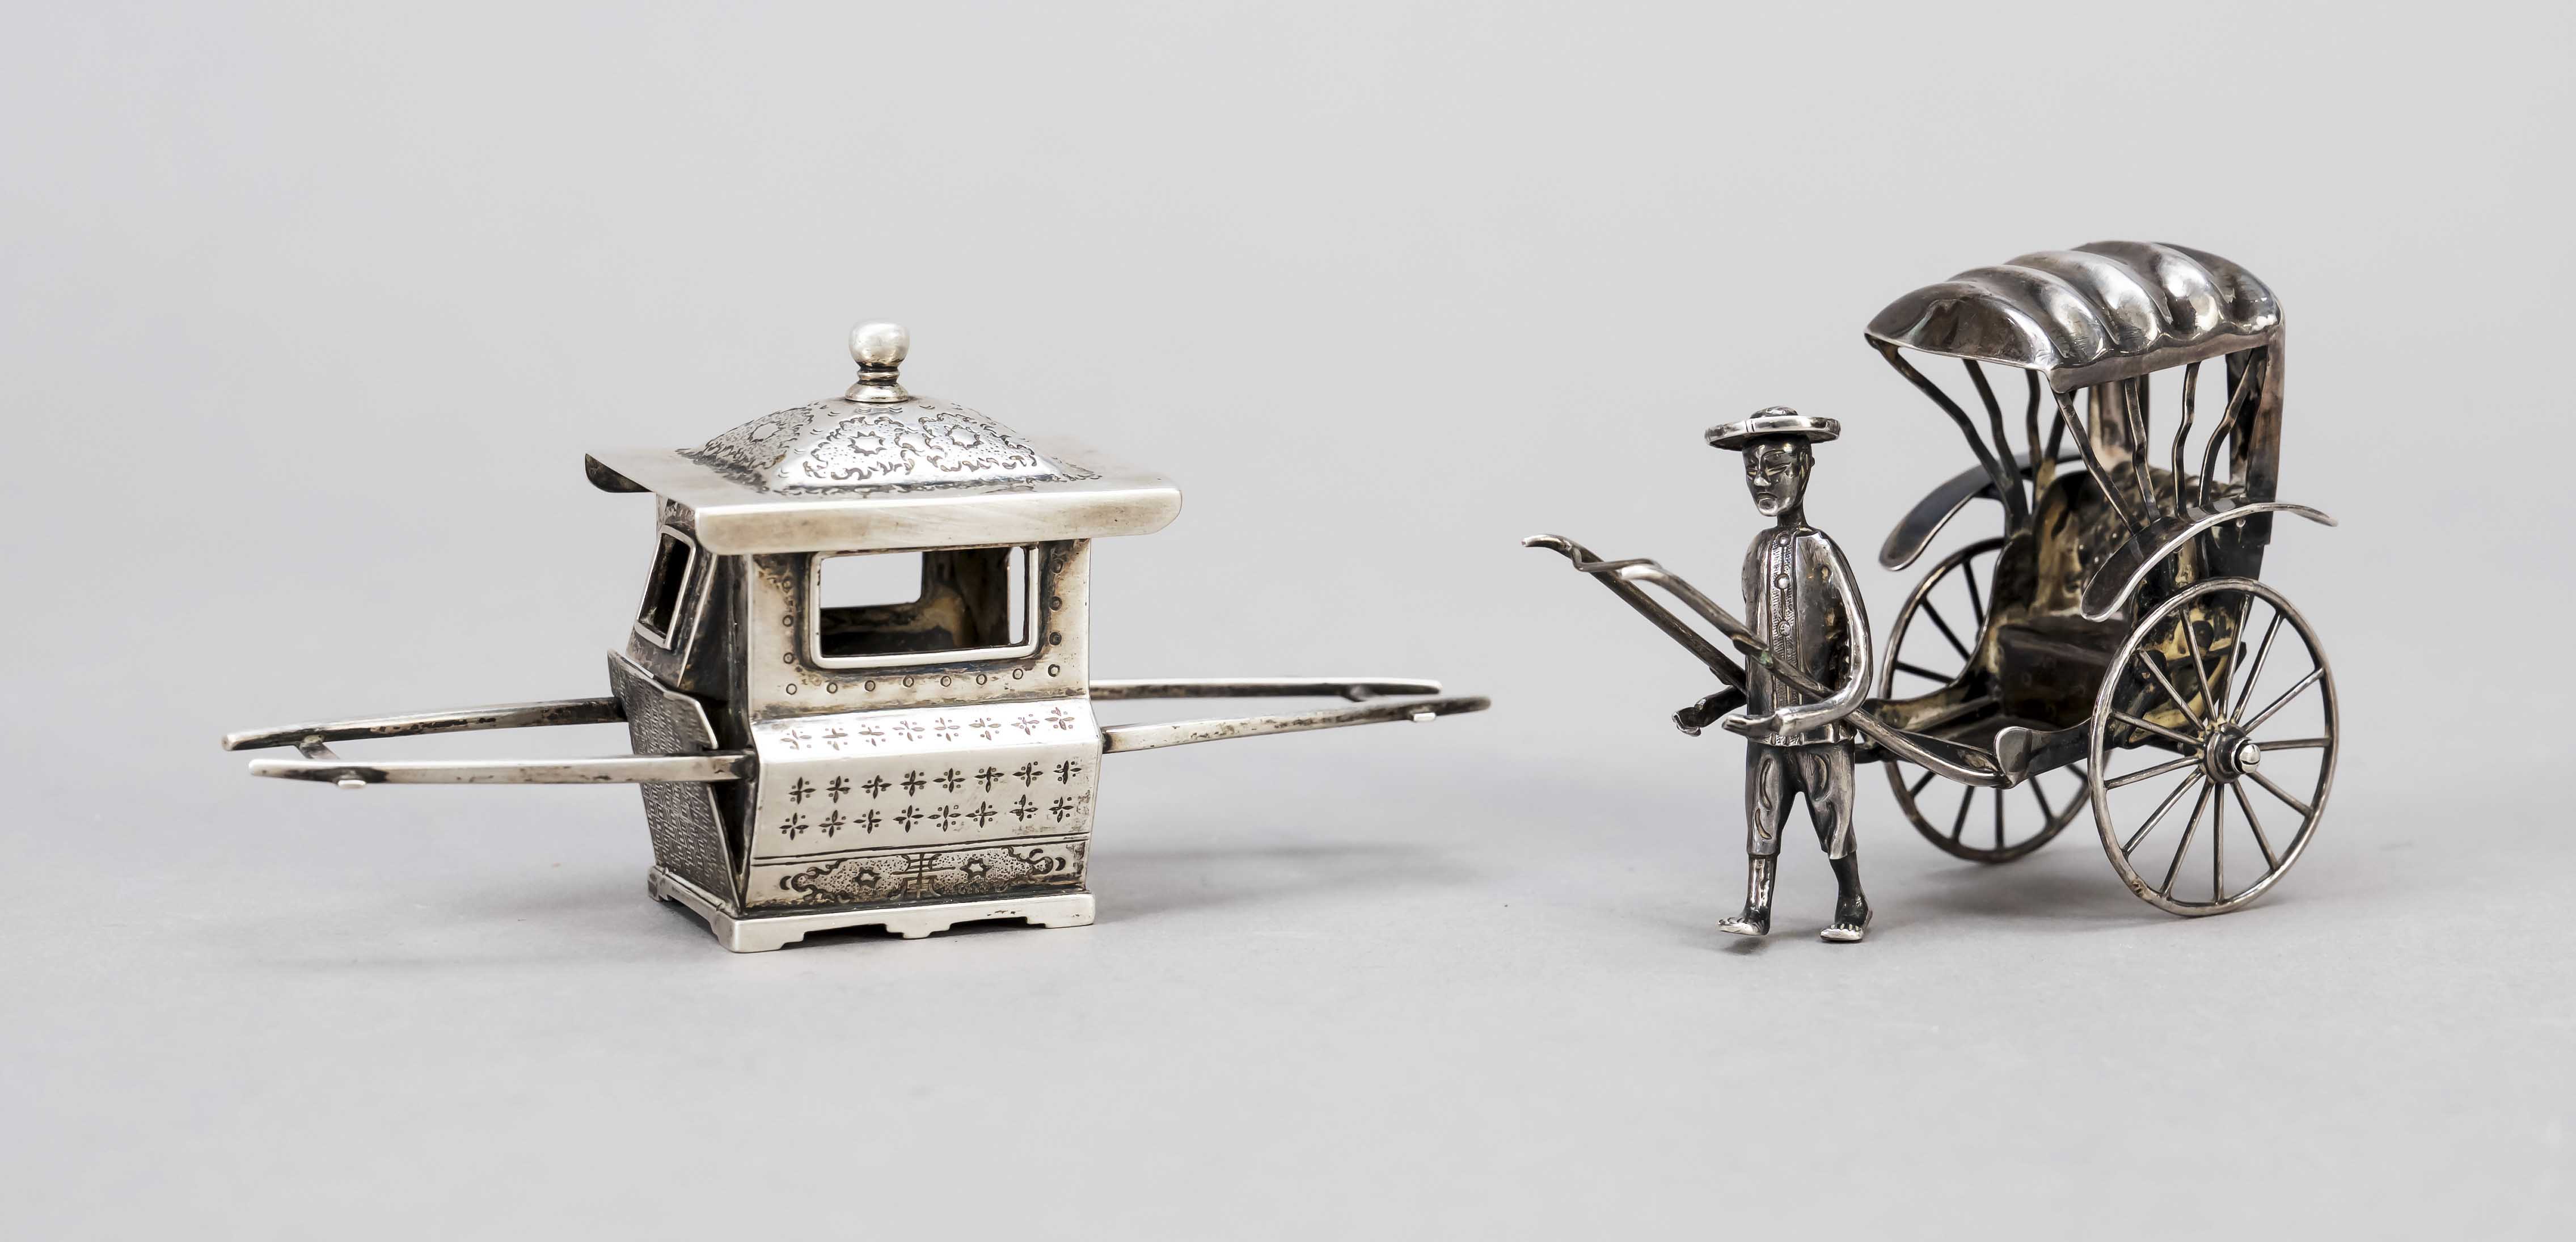 Two miniatures, China c. 1900, Chinese export marks, hallmarked silver, 1 palanquin, master mark